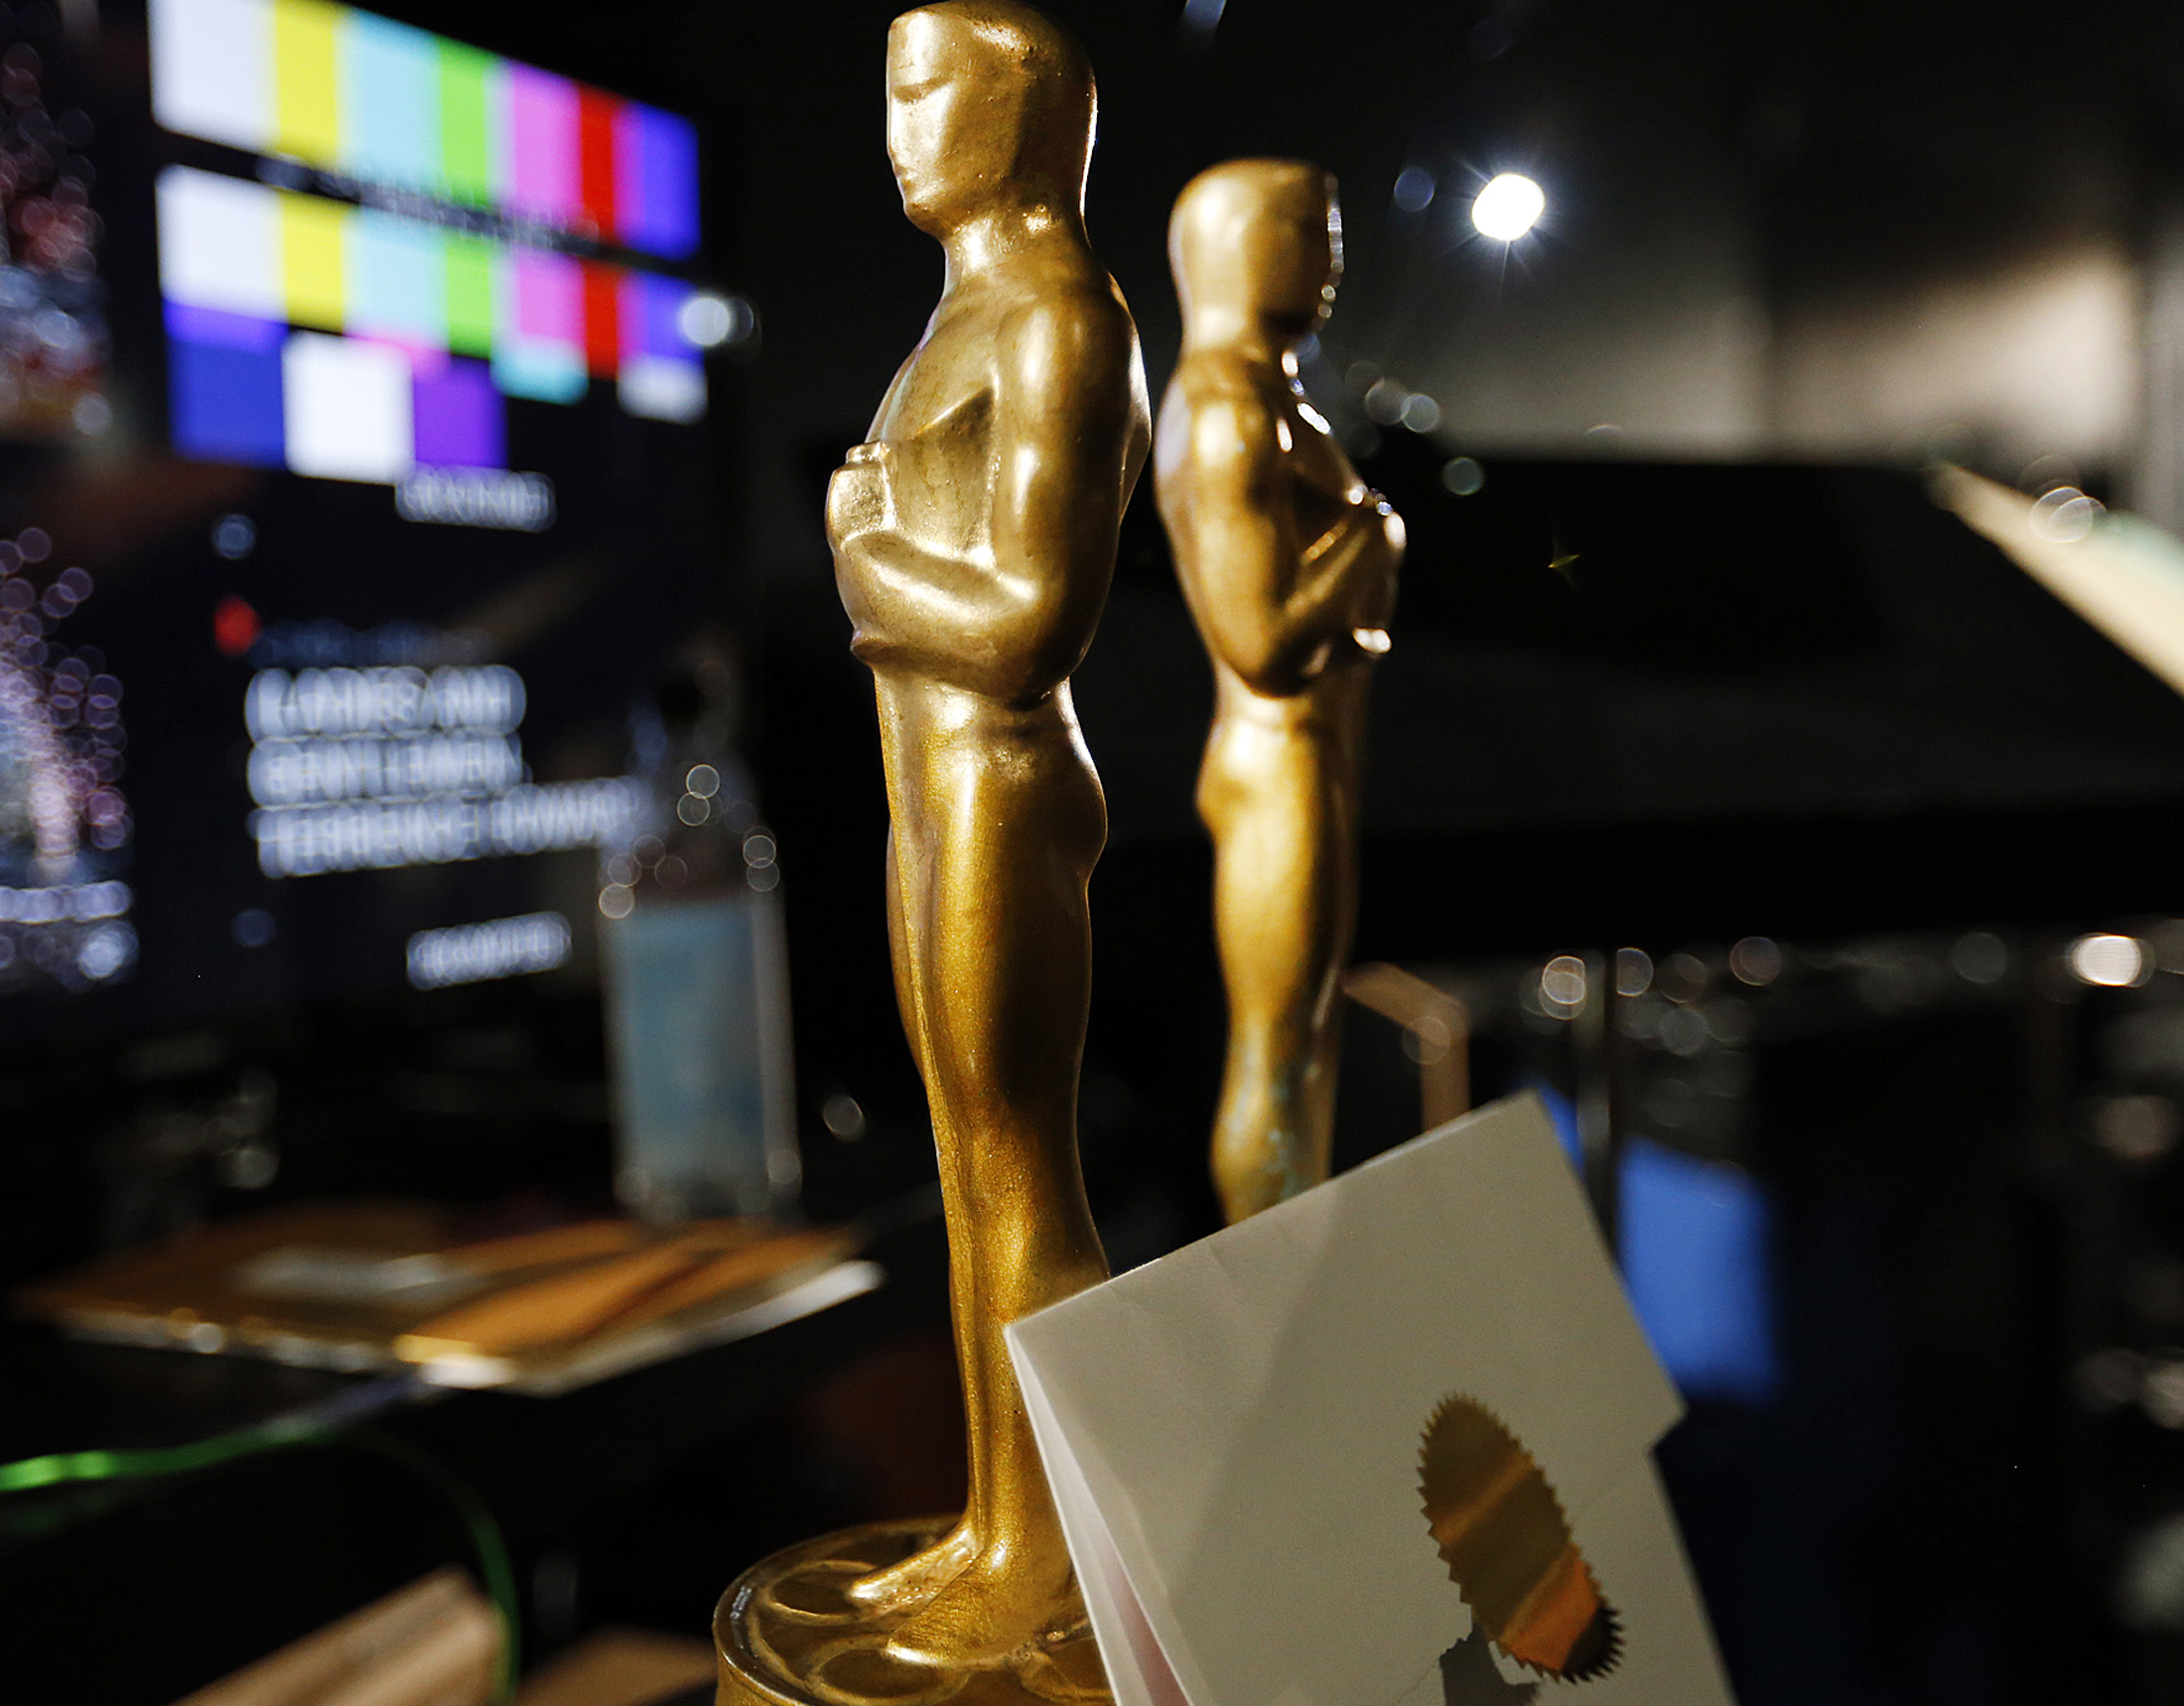 LOS ANGELES, CA - FEBRUARY 18, 2015: Two wooden stand-in Oscar statuettes are ready to be taken on